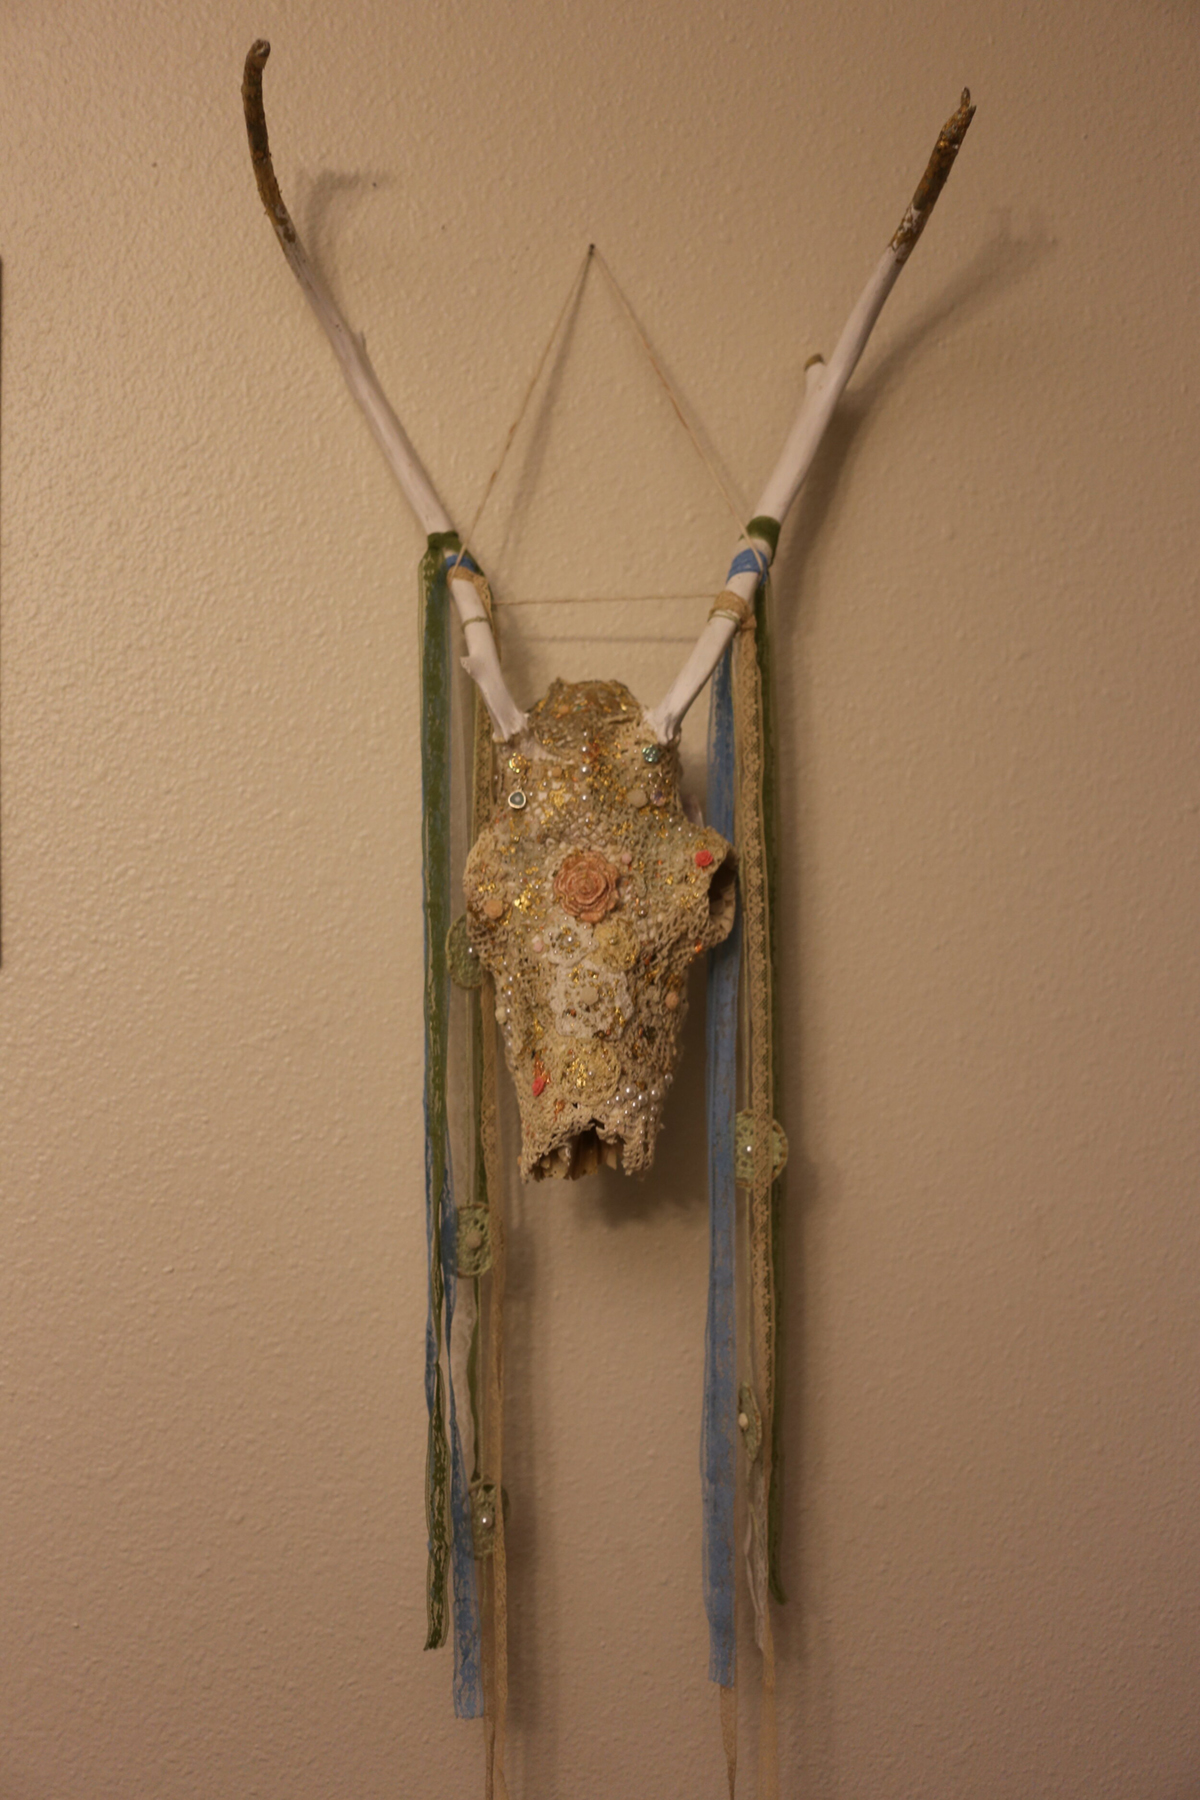 Caribou skull decorated with Lace, Embroidery, Doilies, Gold leaf and Found objects. image courtesy of Indi Walter